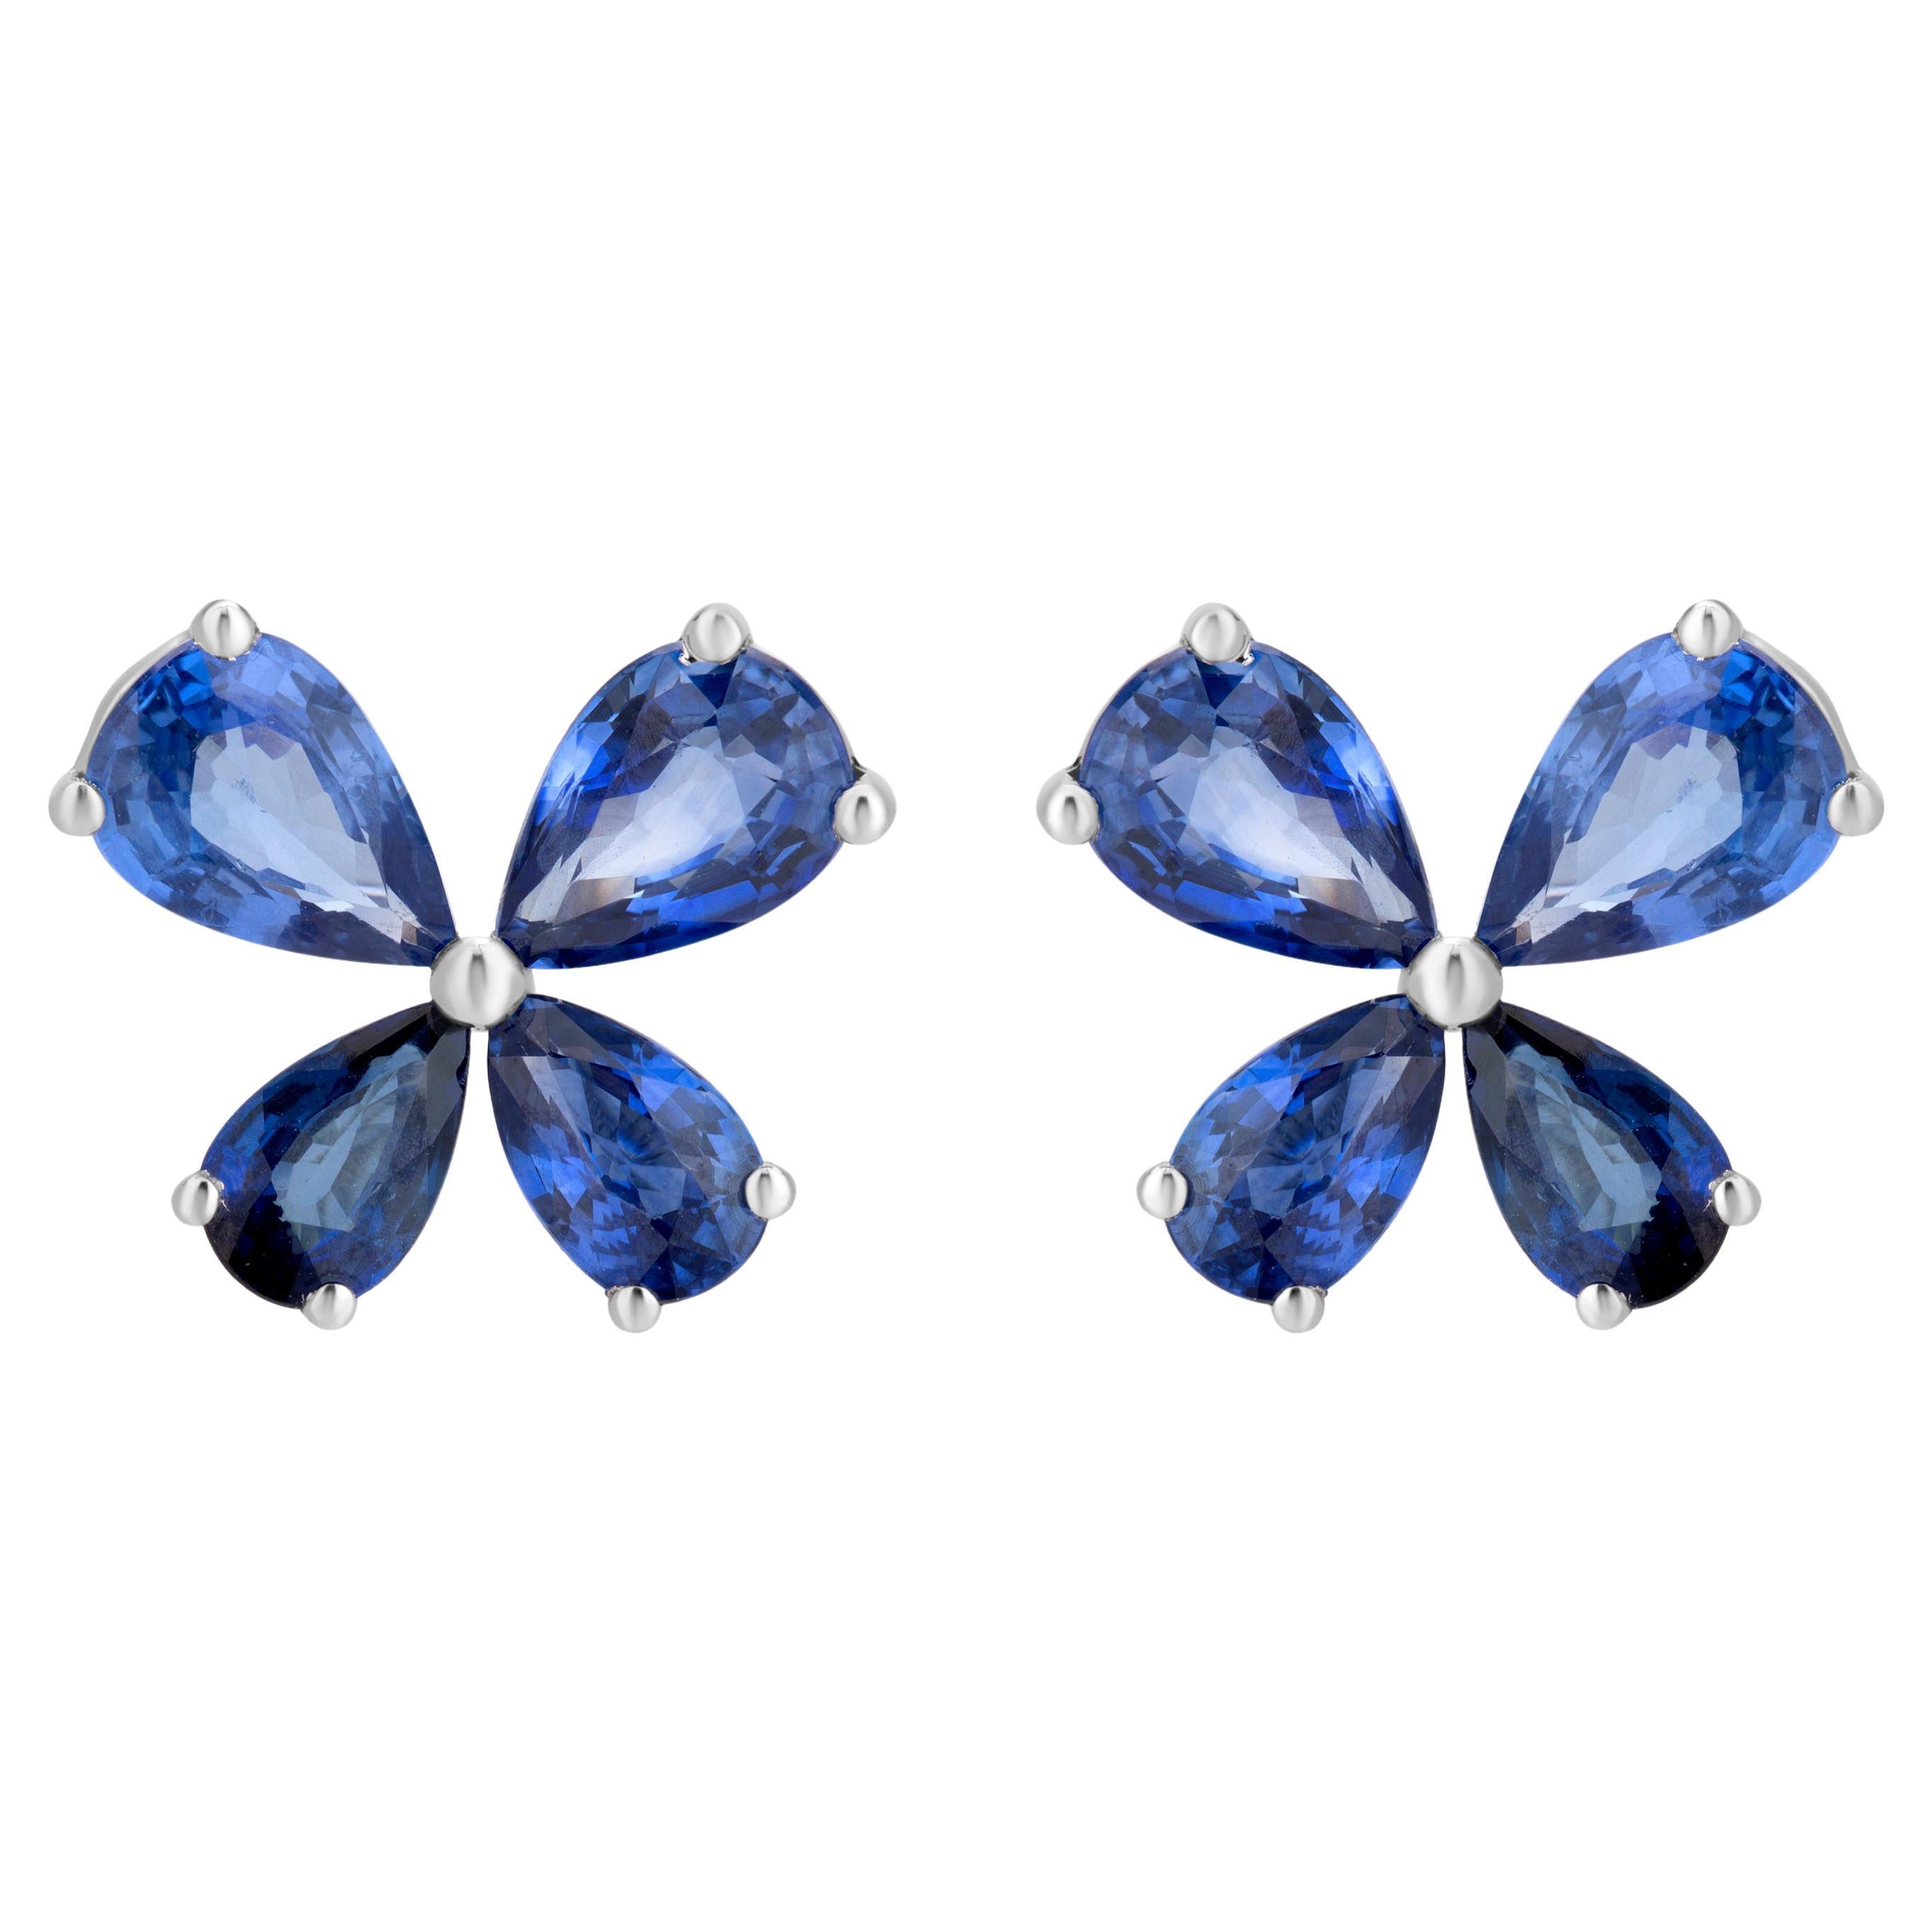 Gemistry 3.45 Cttw. Blue Sapphire Floral Stud Earrings in 18k White Gold For Sale